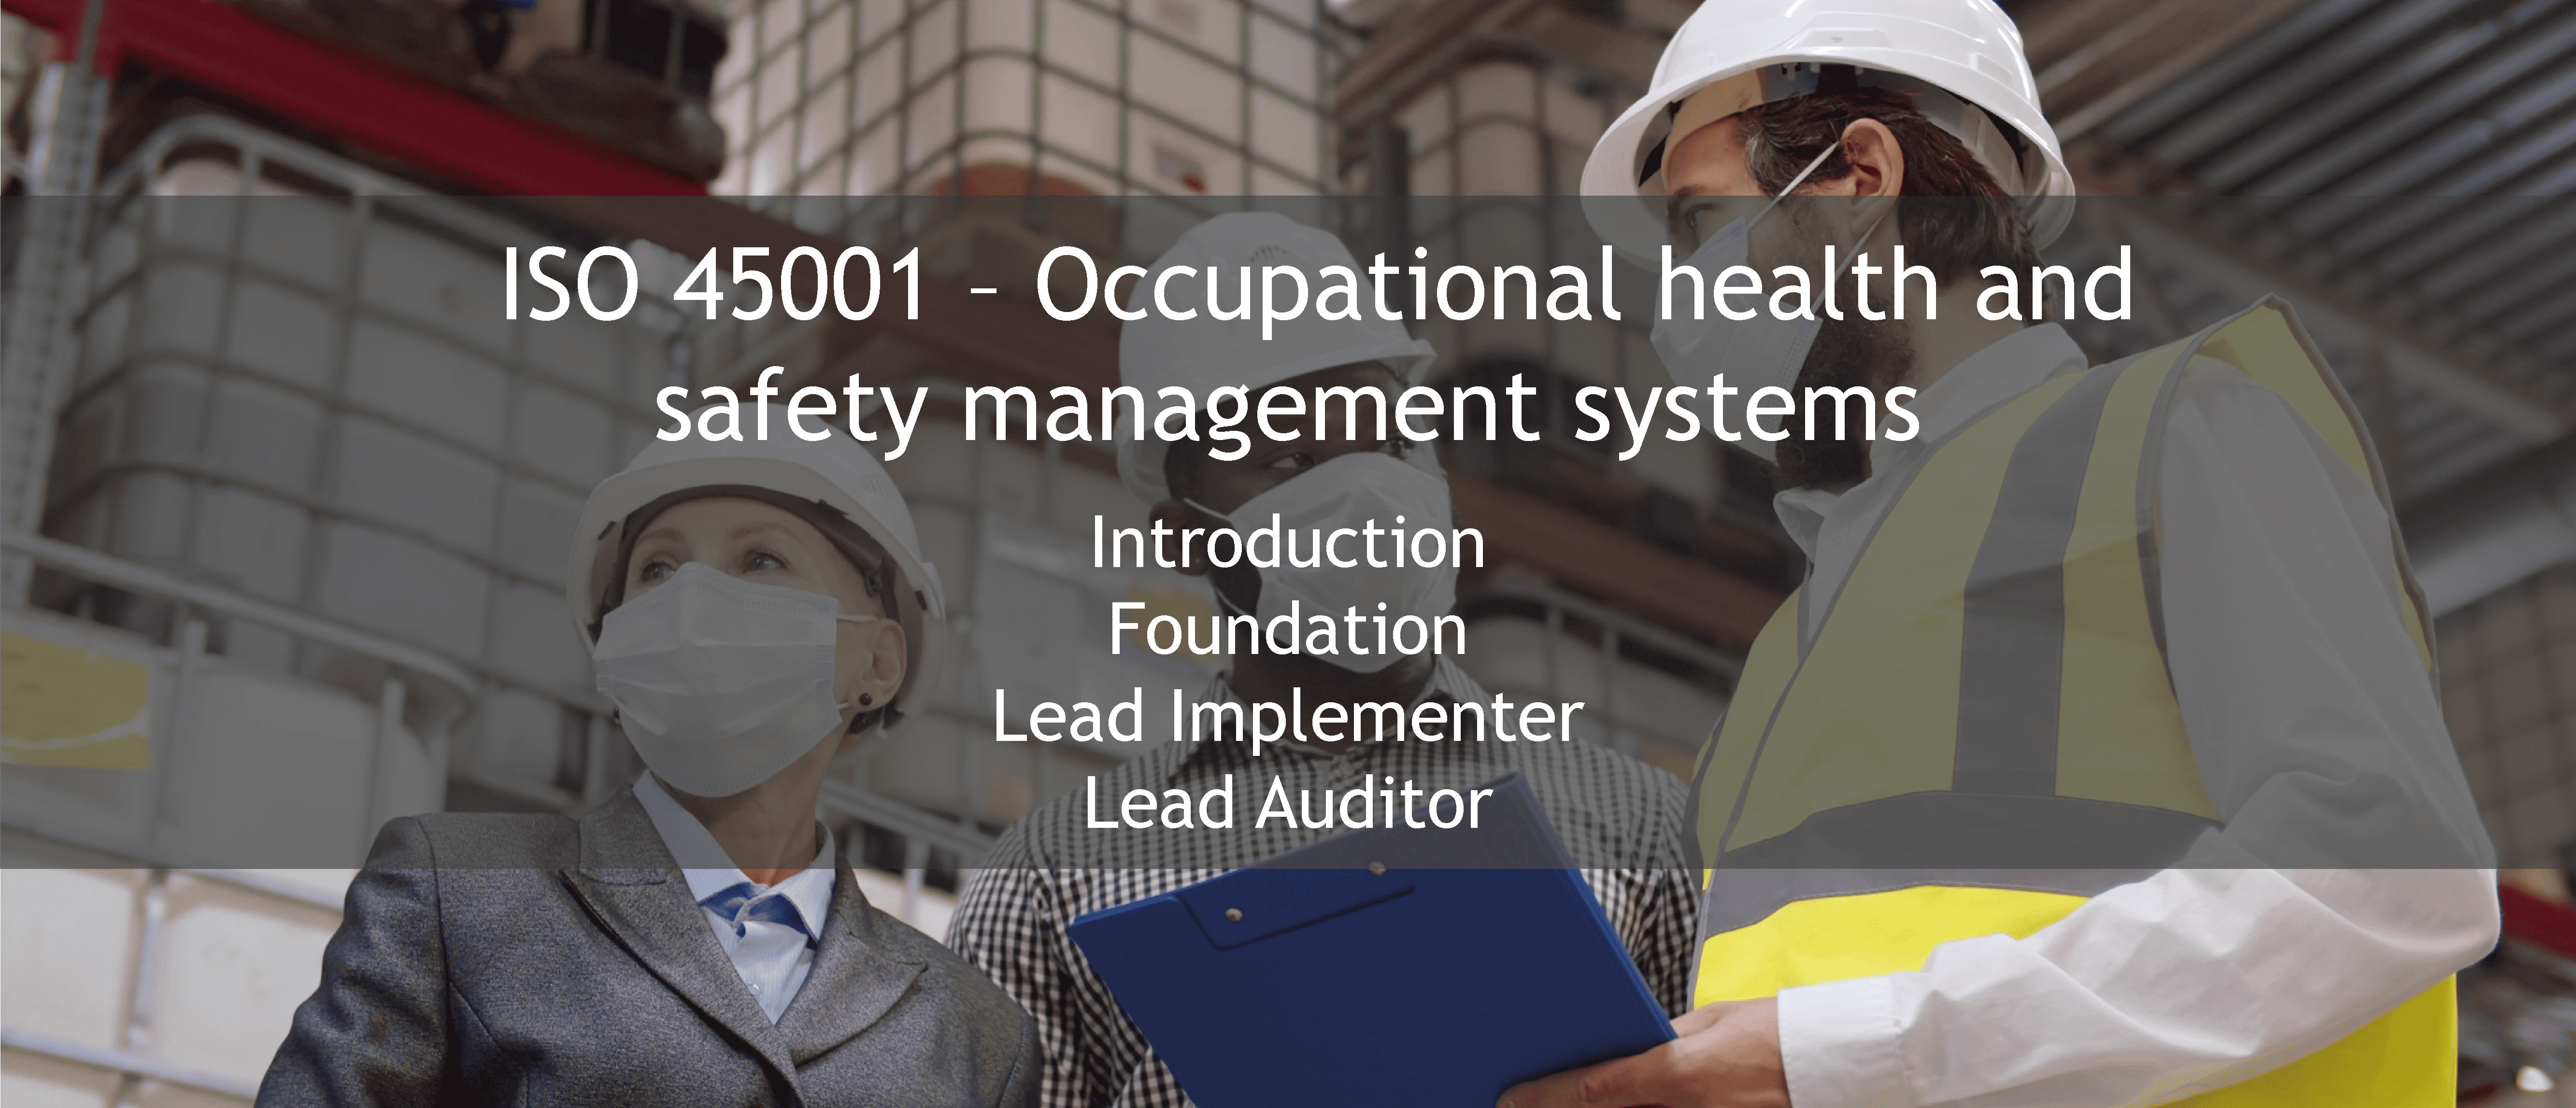 ISO 45001 training offer - Formations